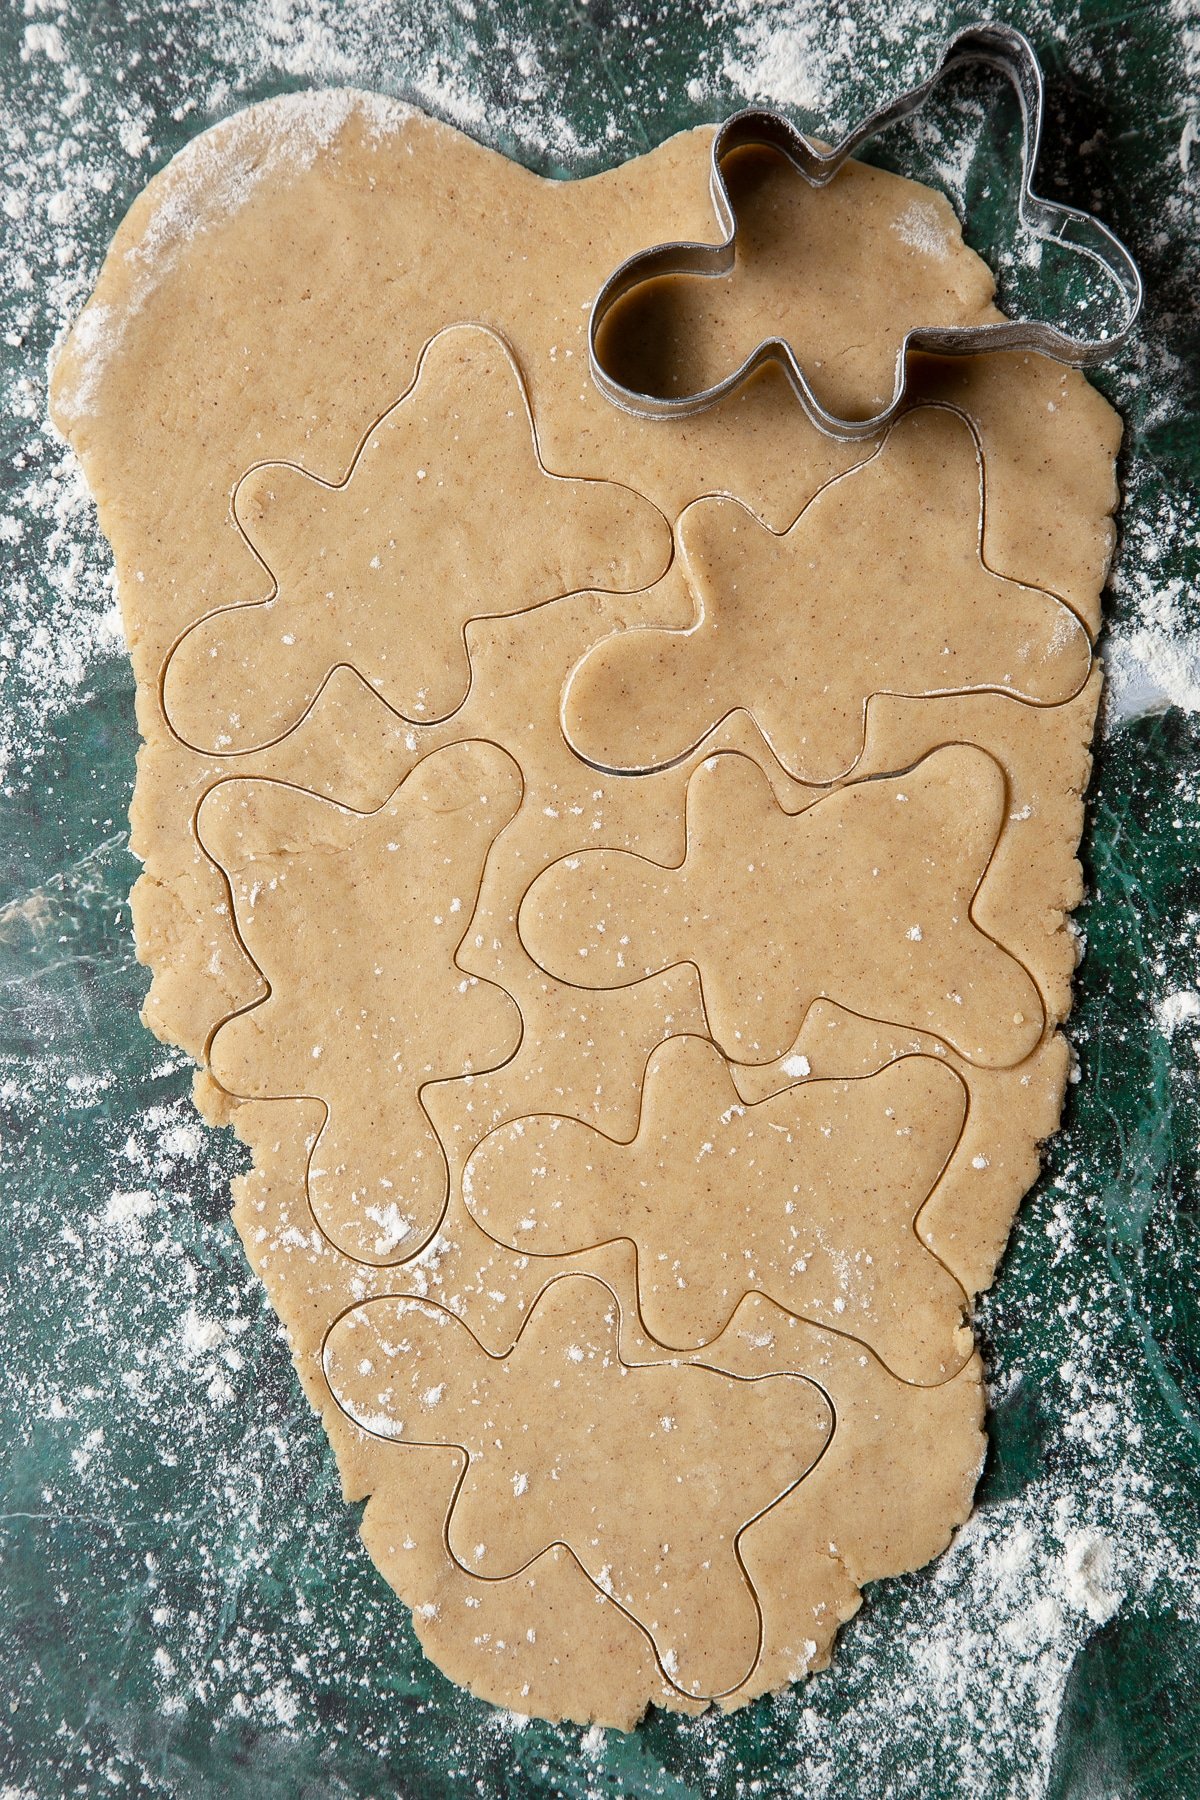 Cookie dough rolled out. A gingerbread man cutter has cut several shapes.